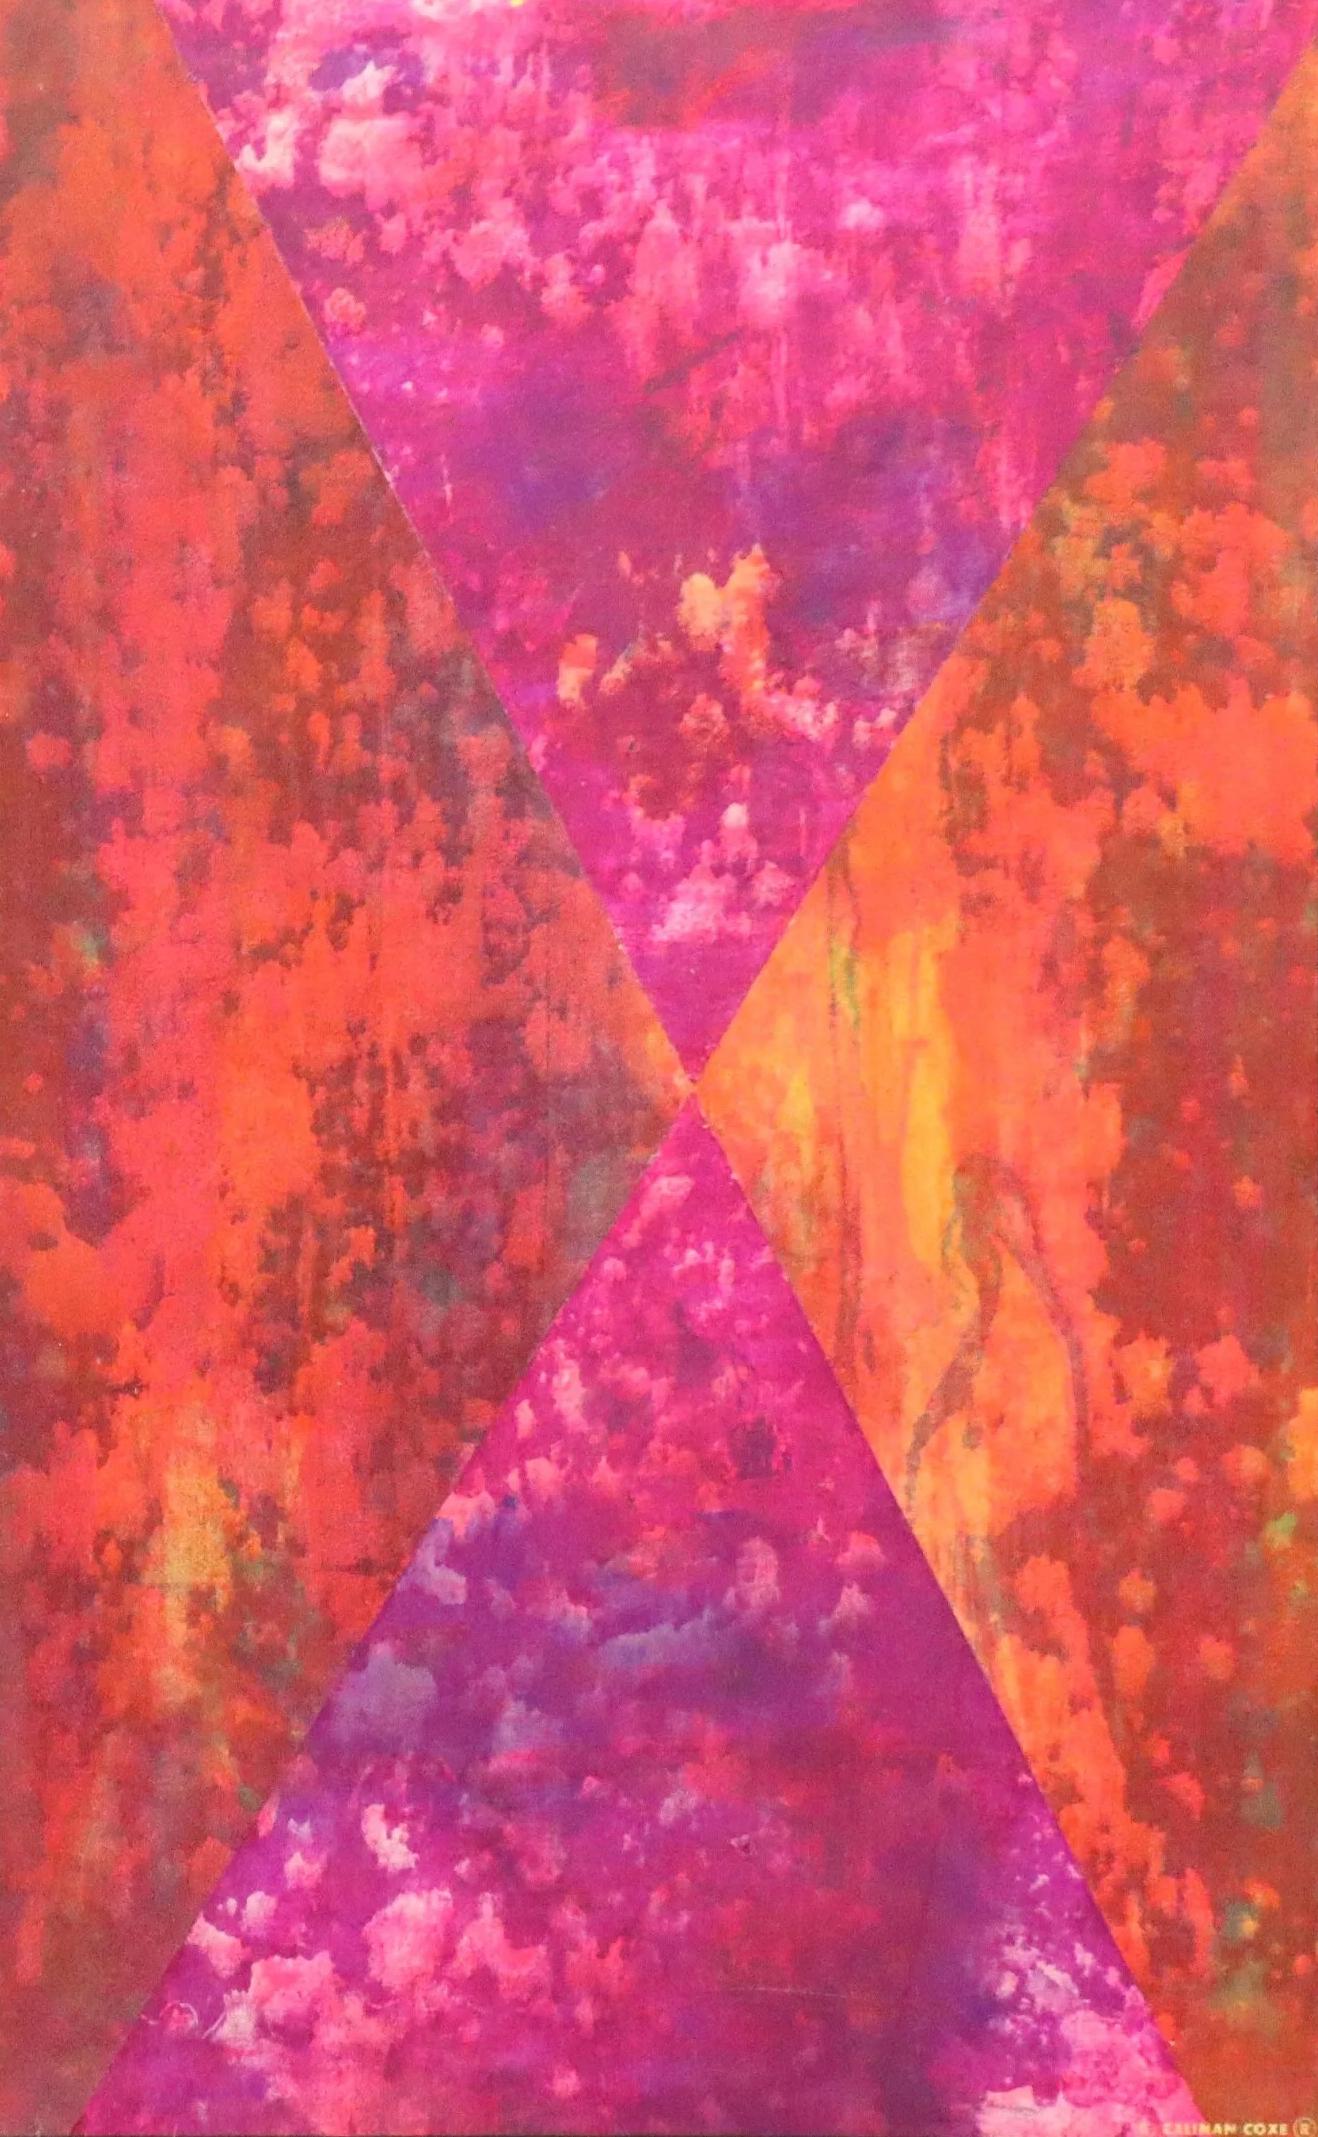 G. Caliman Coxe Abstract Painting - Exodus 12 - African American Artist - colorful abstract red orange purple pink